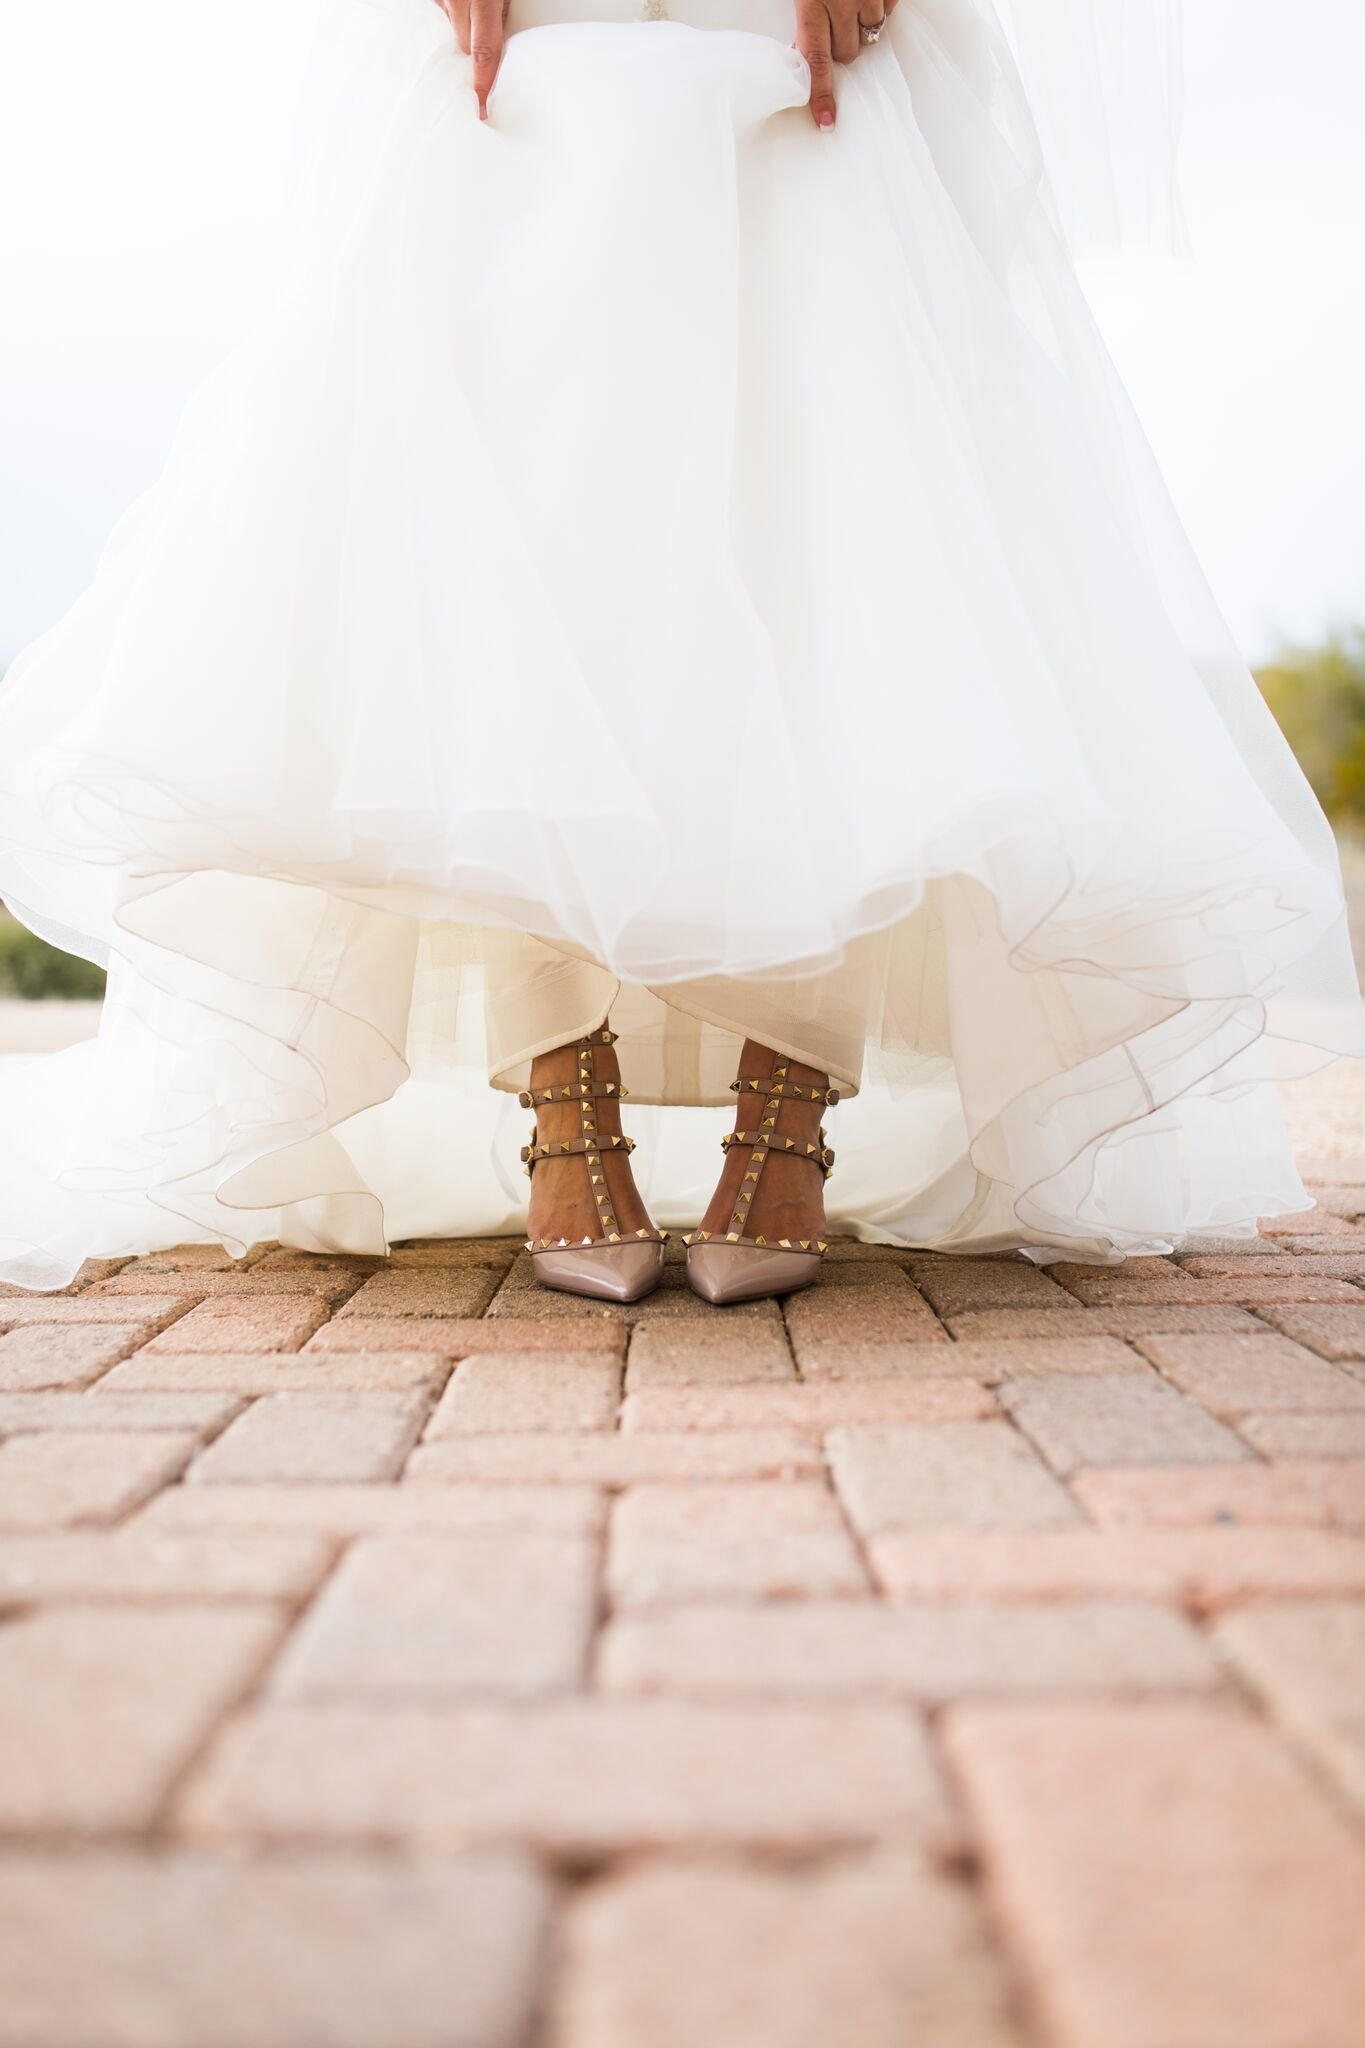 YEF_Bride in Her Shoes_preview